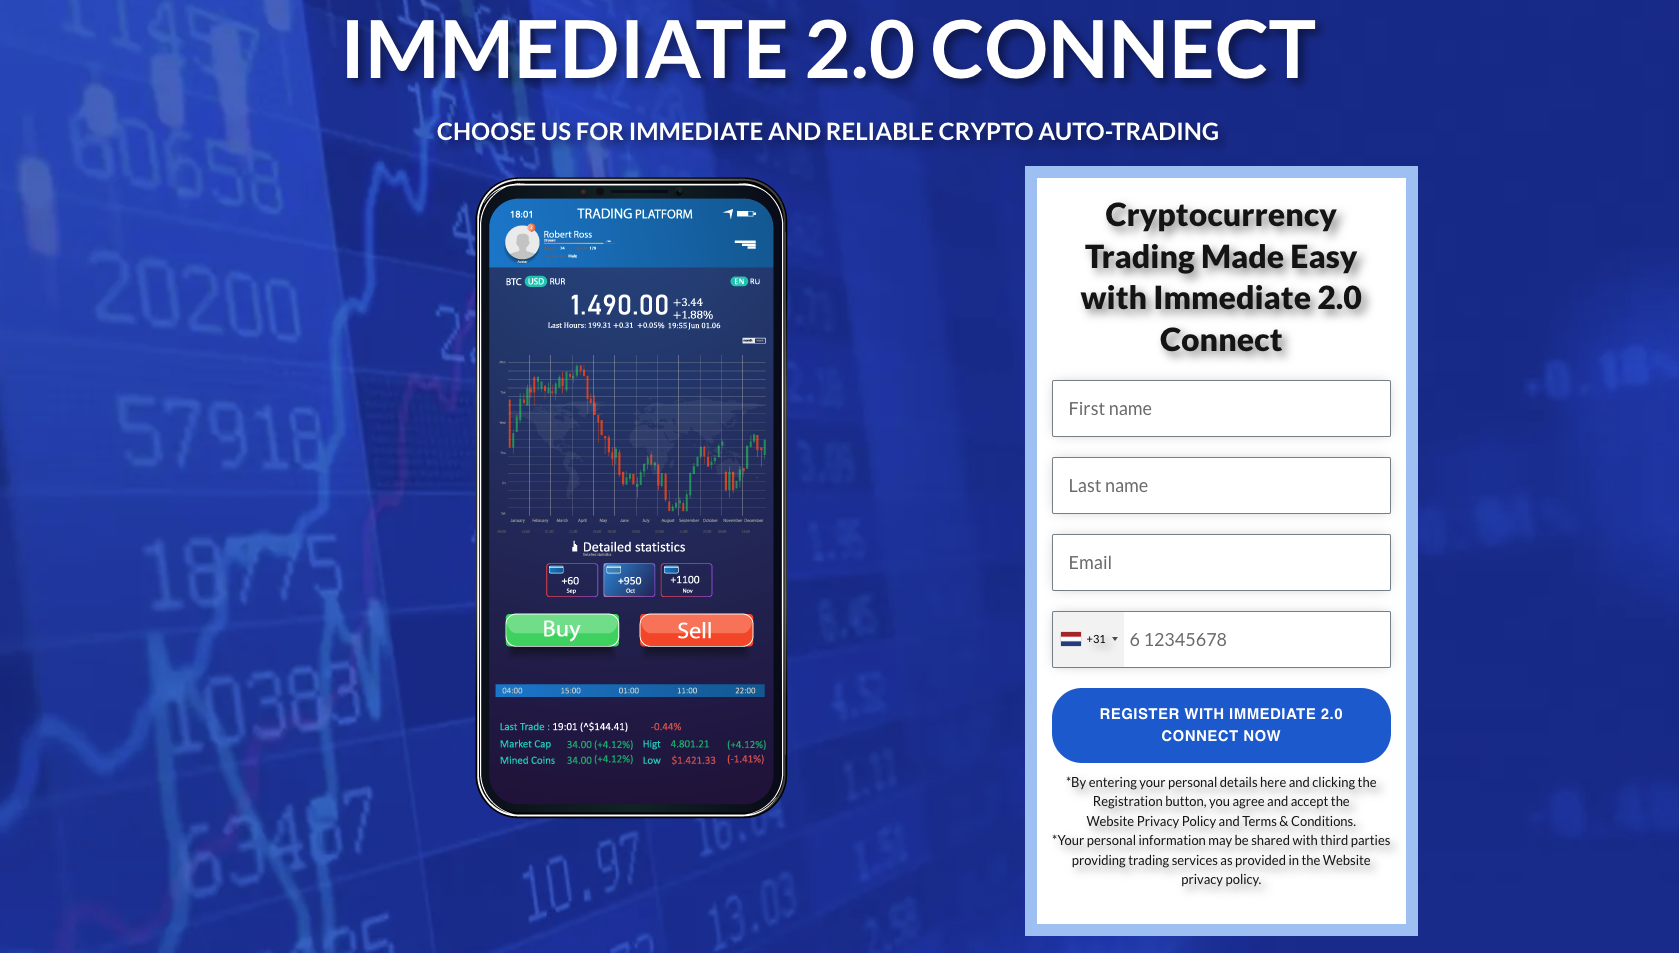 Immediate 2.0 Connect Featured Image